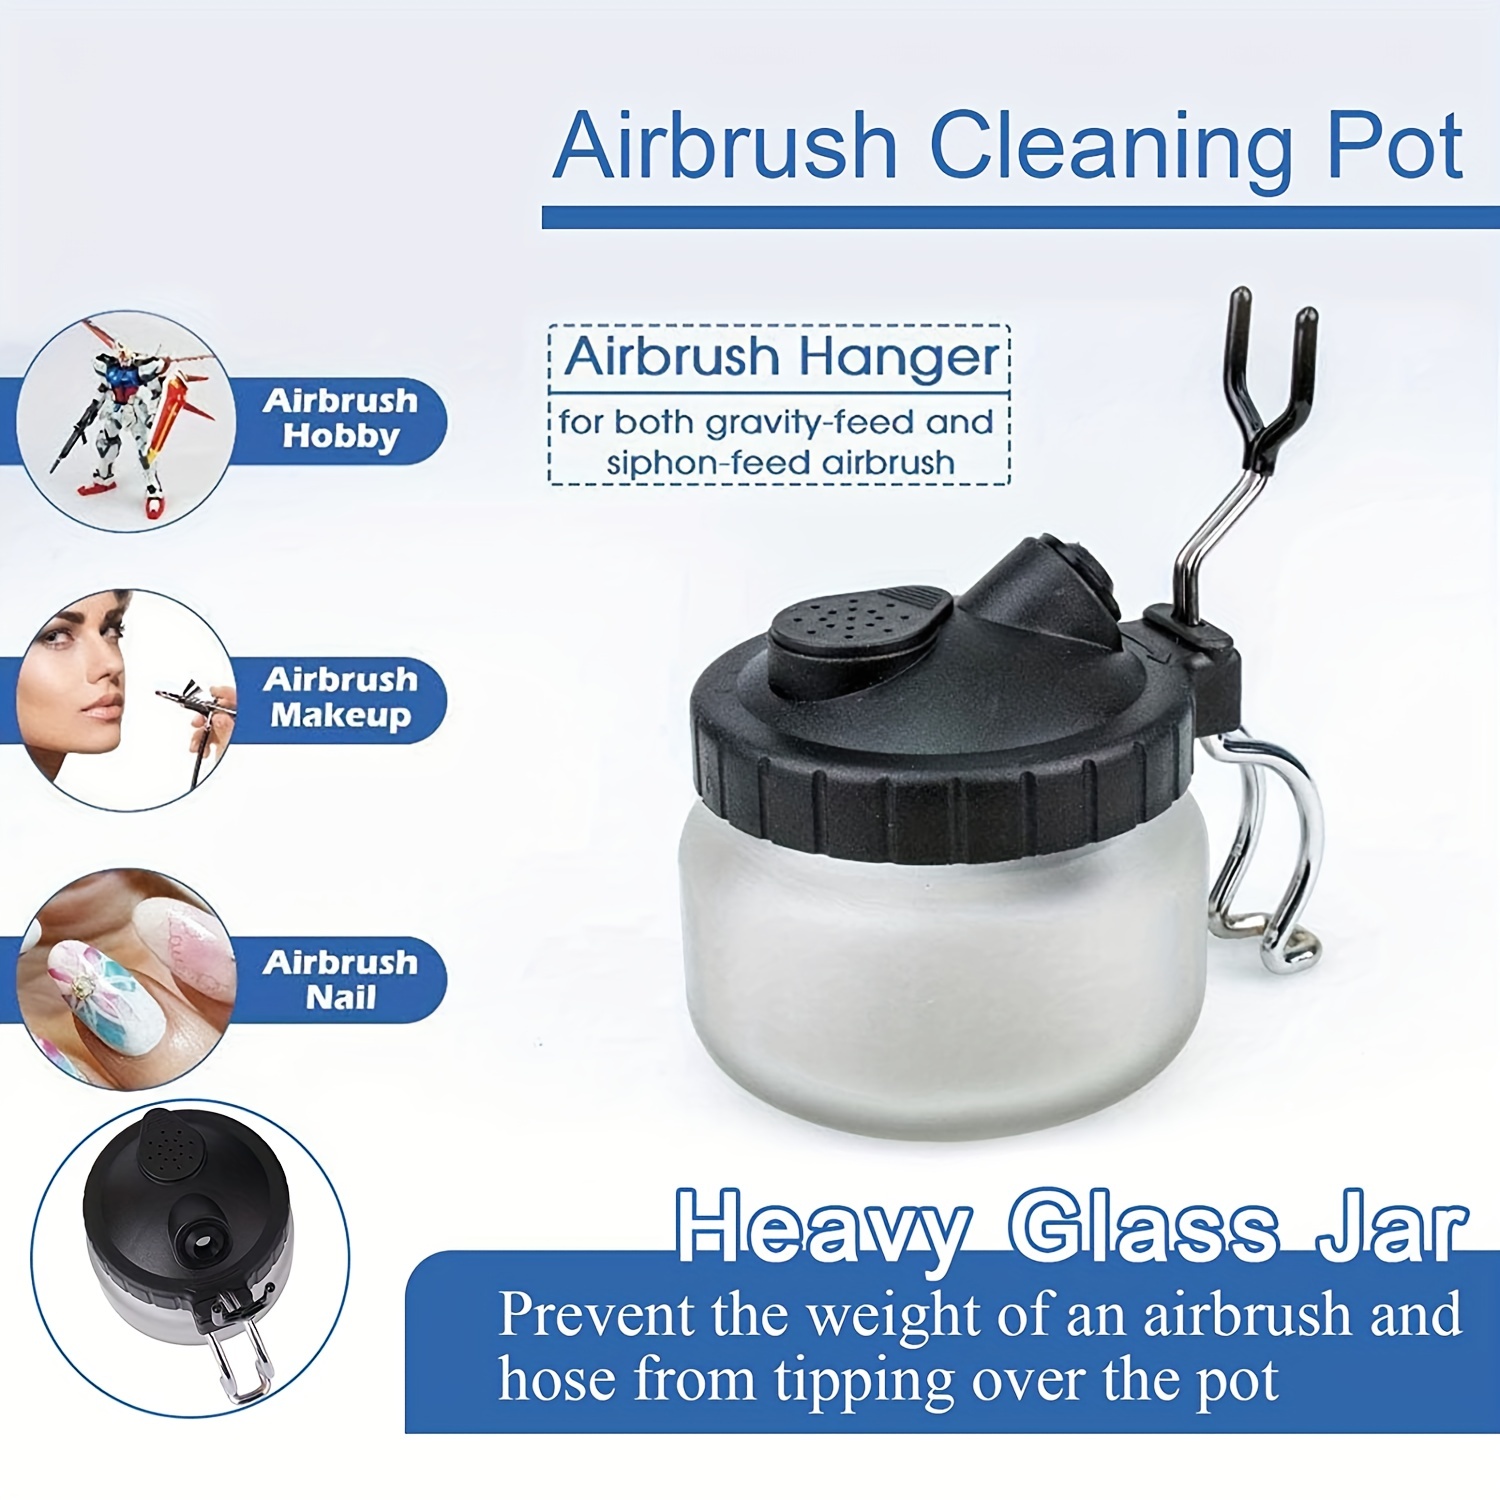 Deluxe Airbrush Cleaning Kit - 3 in 1 Clean Pot, 2 - 4oz Cleaning Solution  & Kit, Bundle - King Soopers